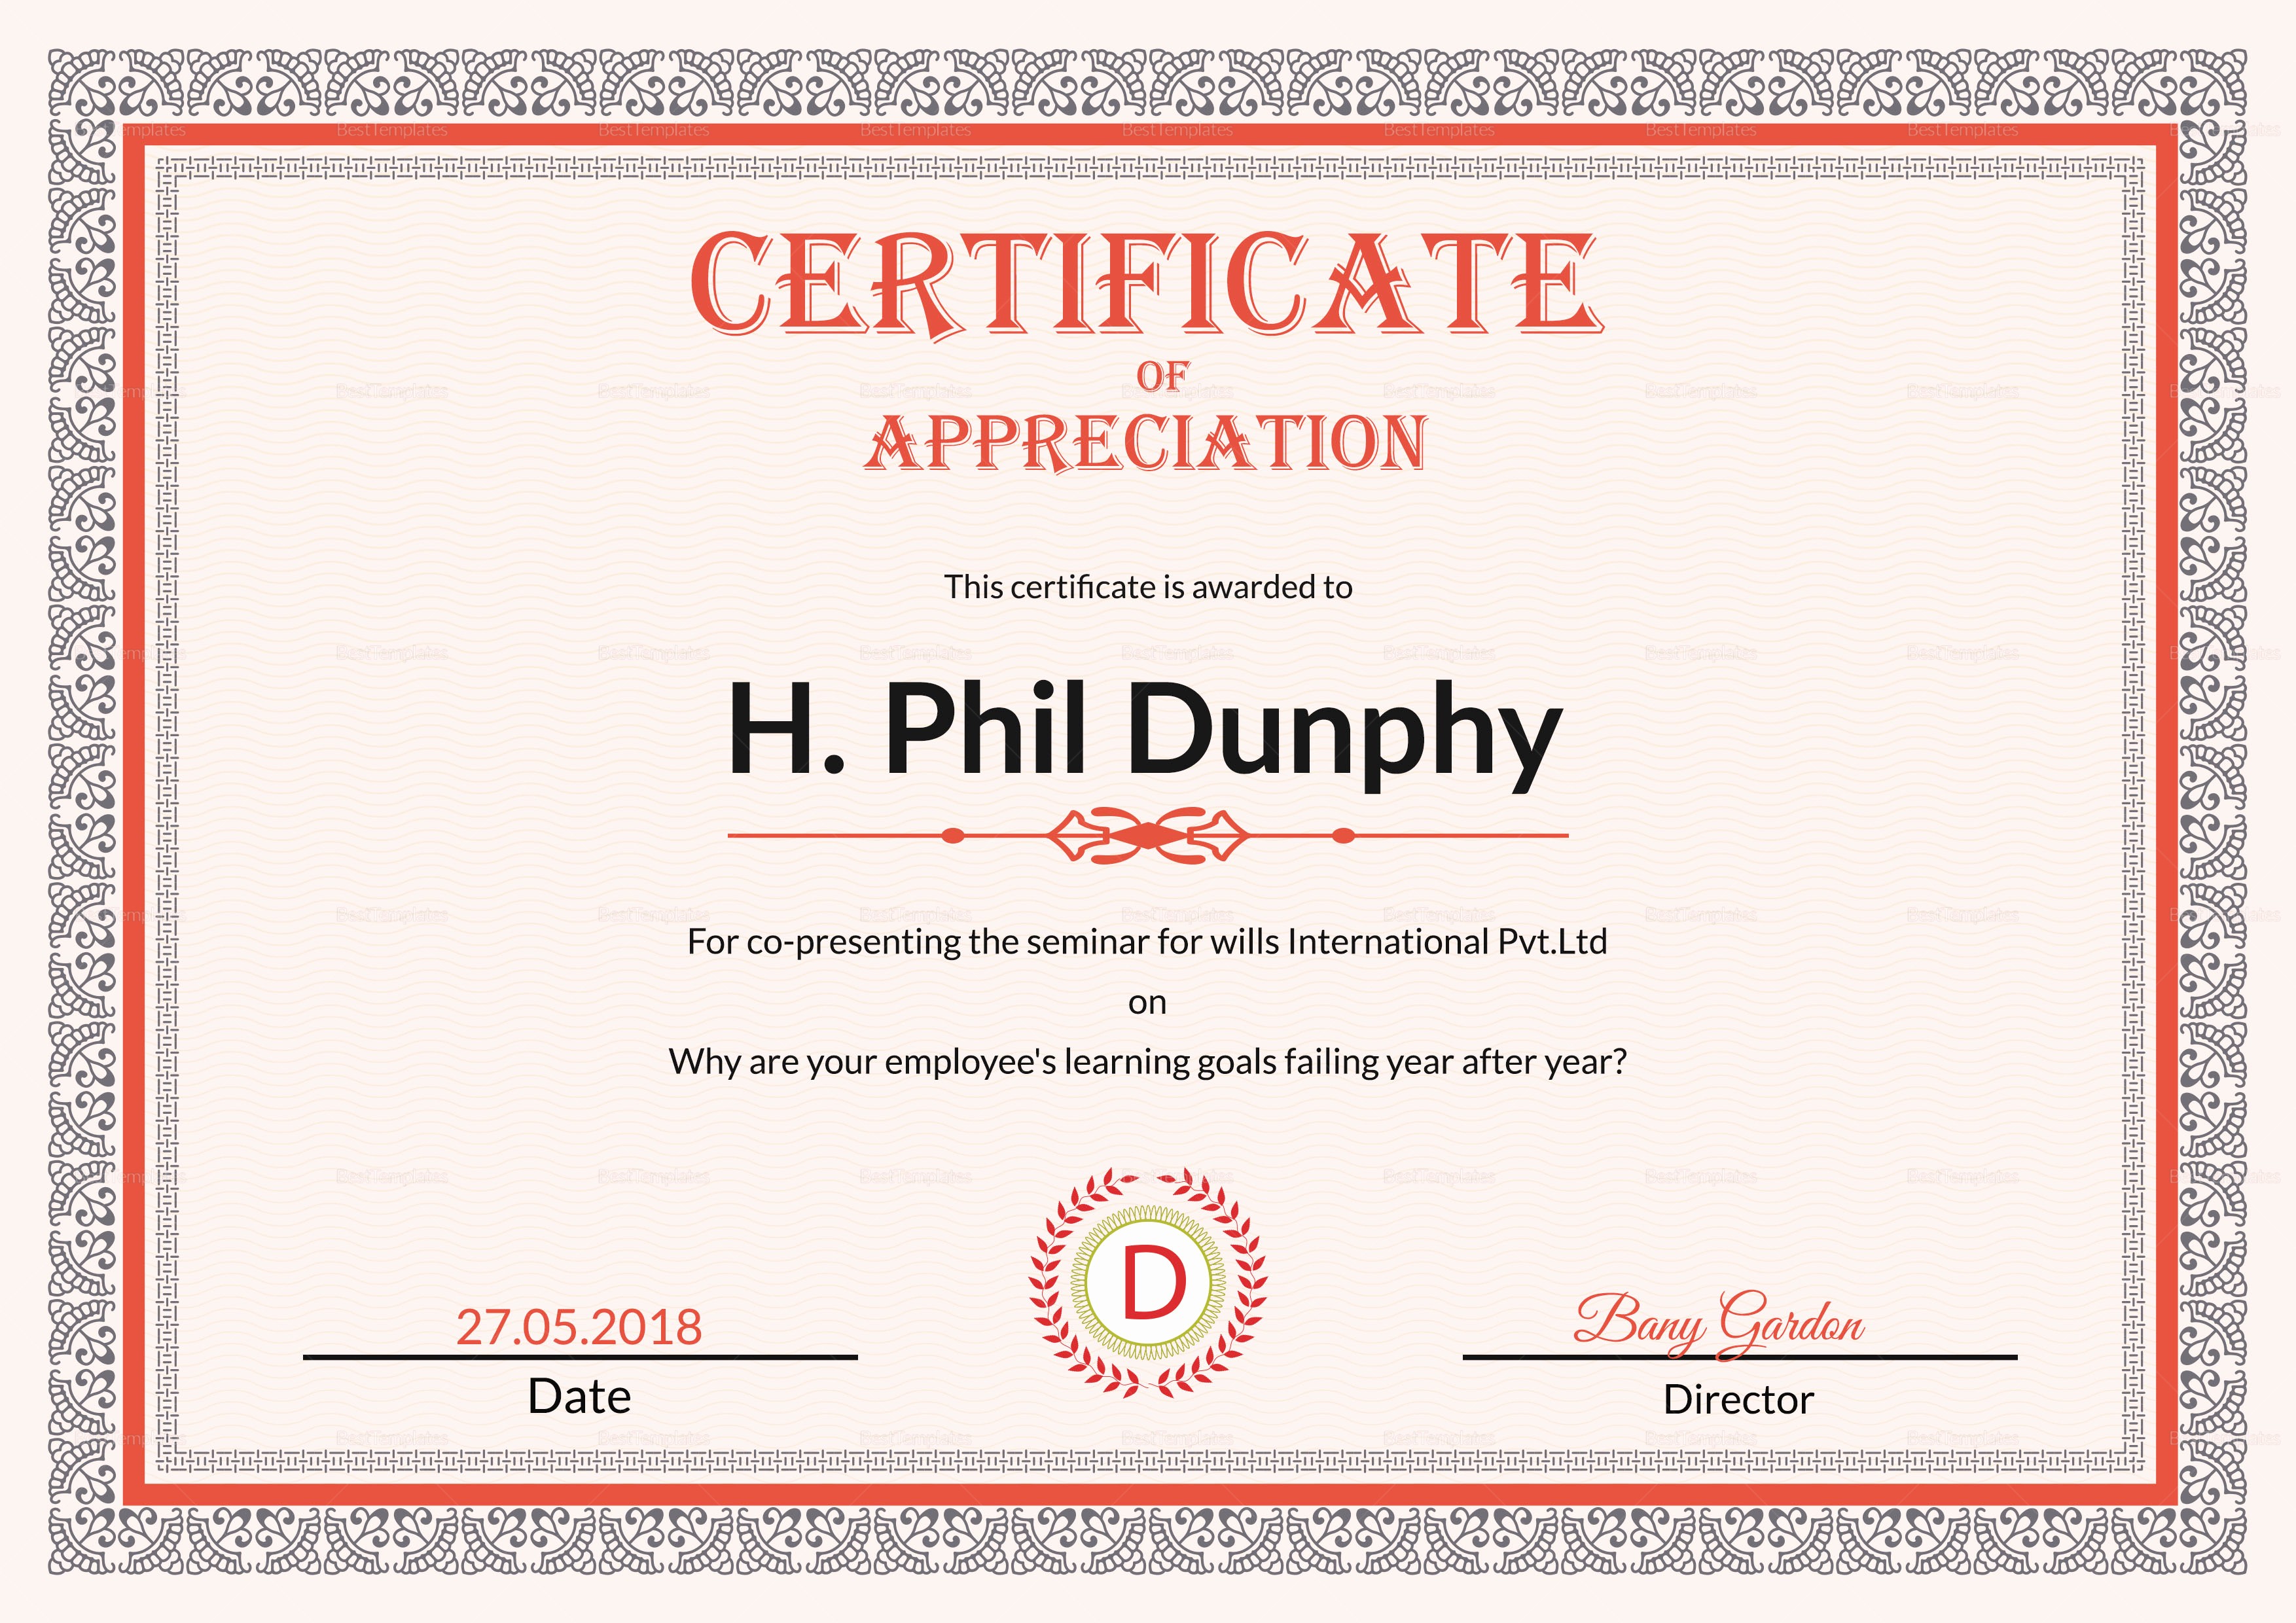 Appreciation Certificate Templates for Word New Certificate Of Appreciation Design Template In Psd Word